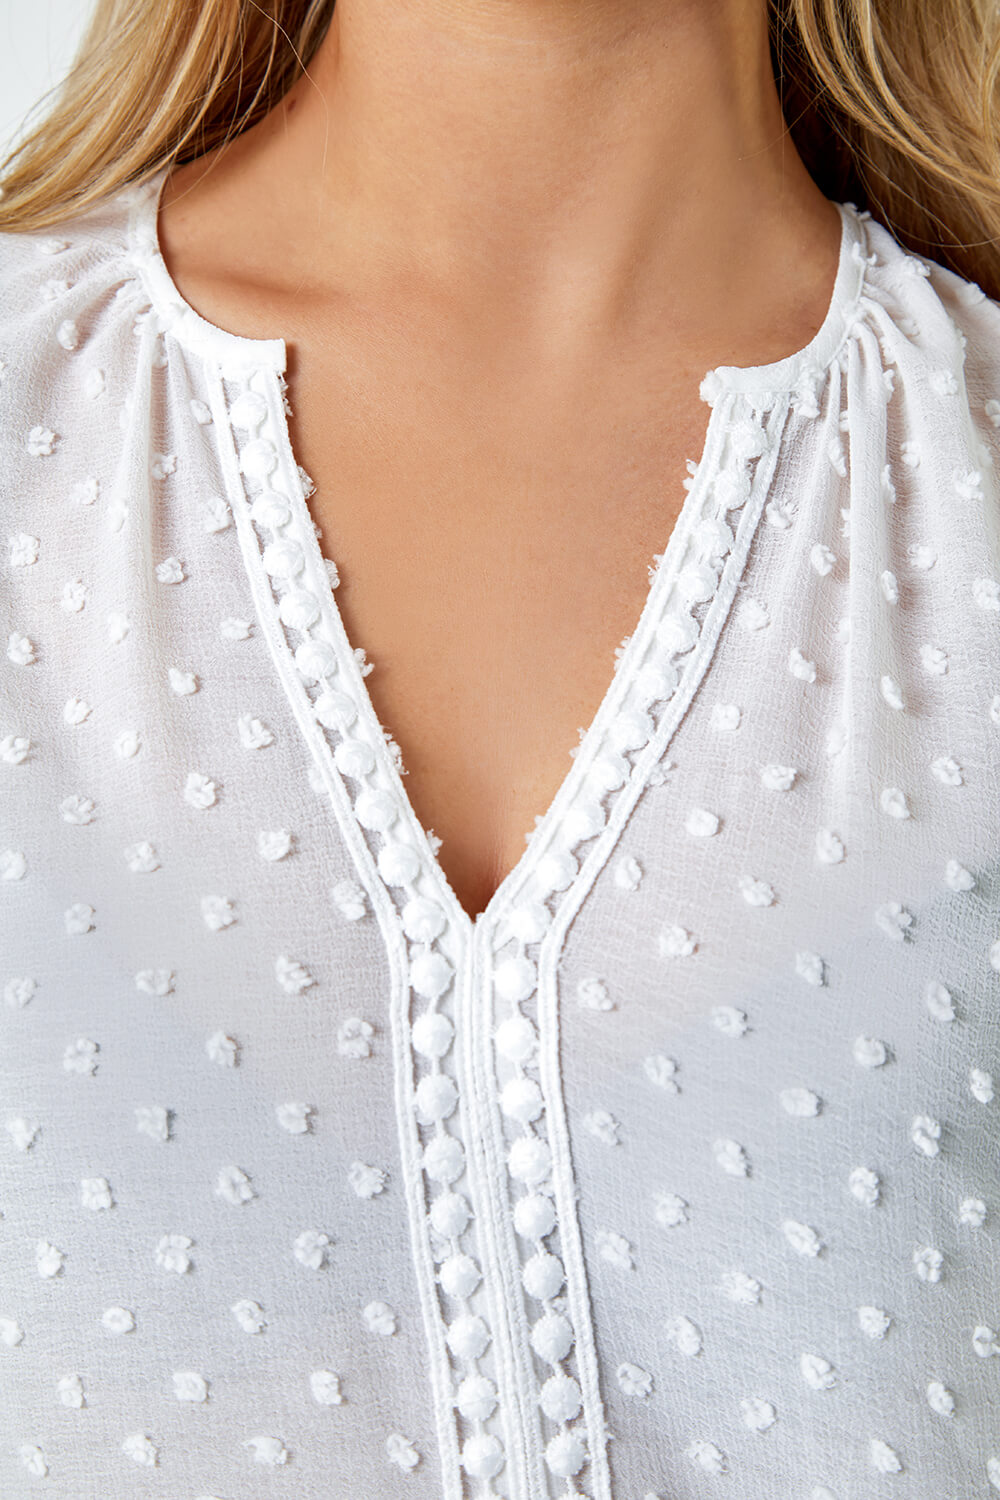 Ivory  Petite Textured Spot Print Top, Image 5 of 5